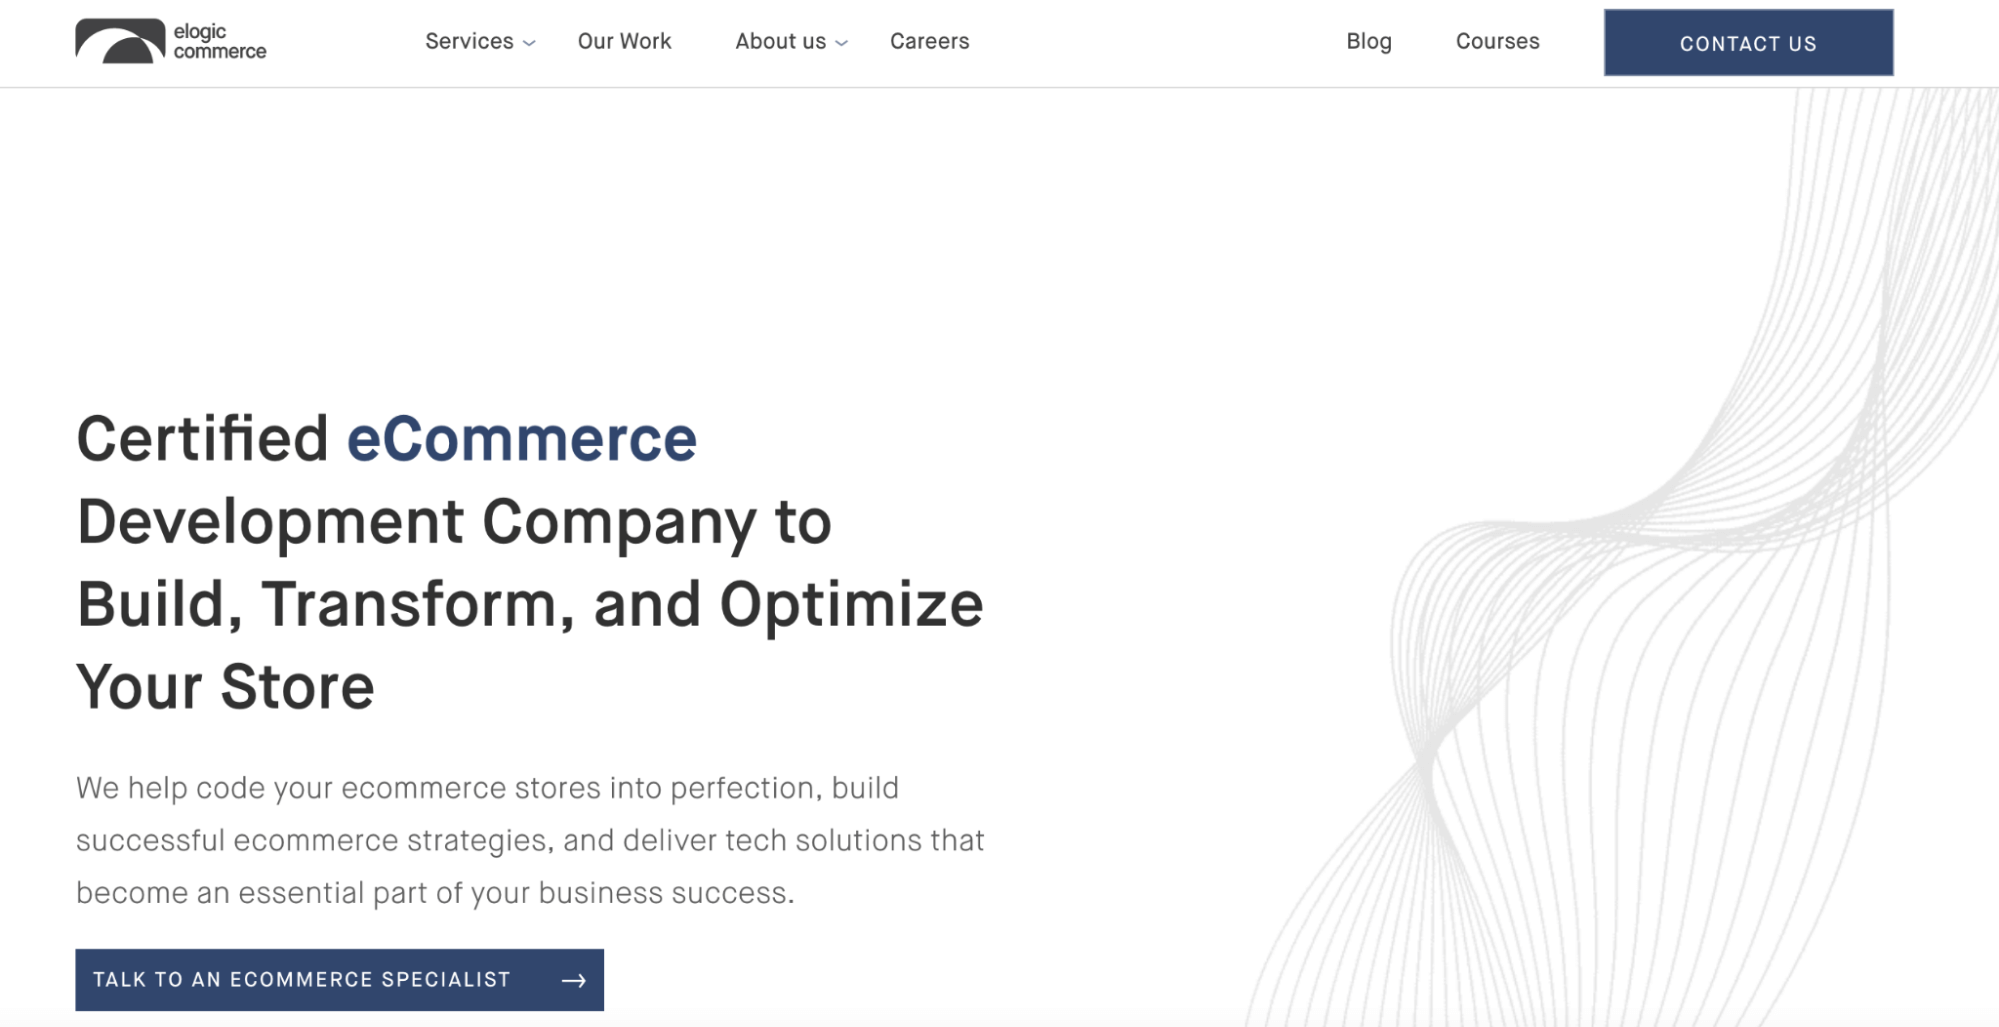 Elogic eCommerce homepage: Certified eCommerce development company to build, transform, and optimize your store